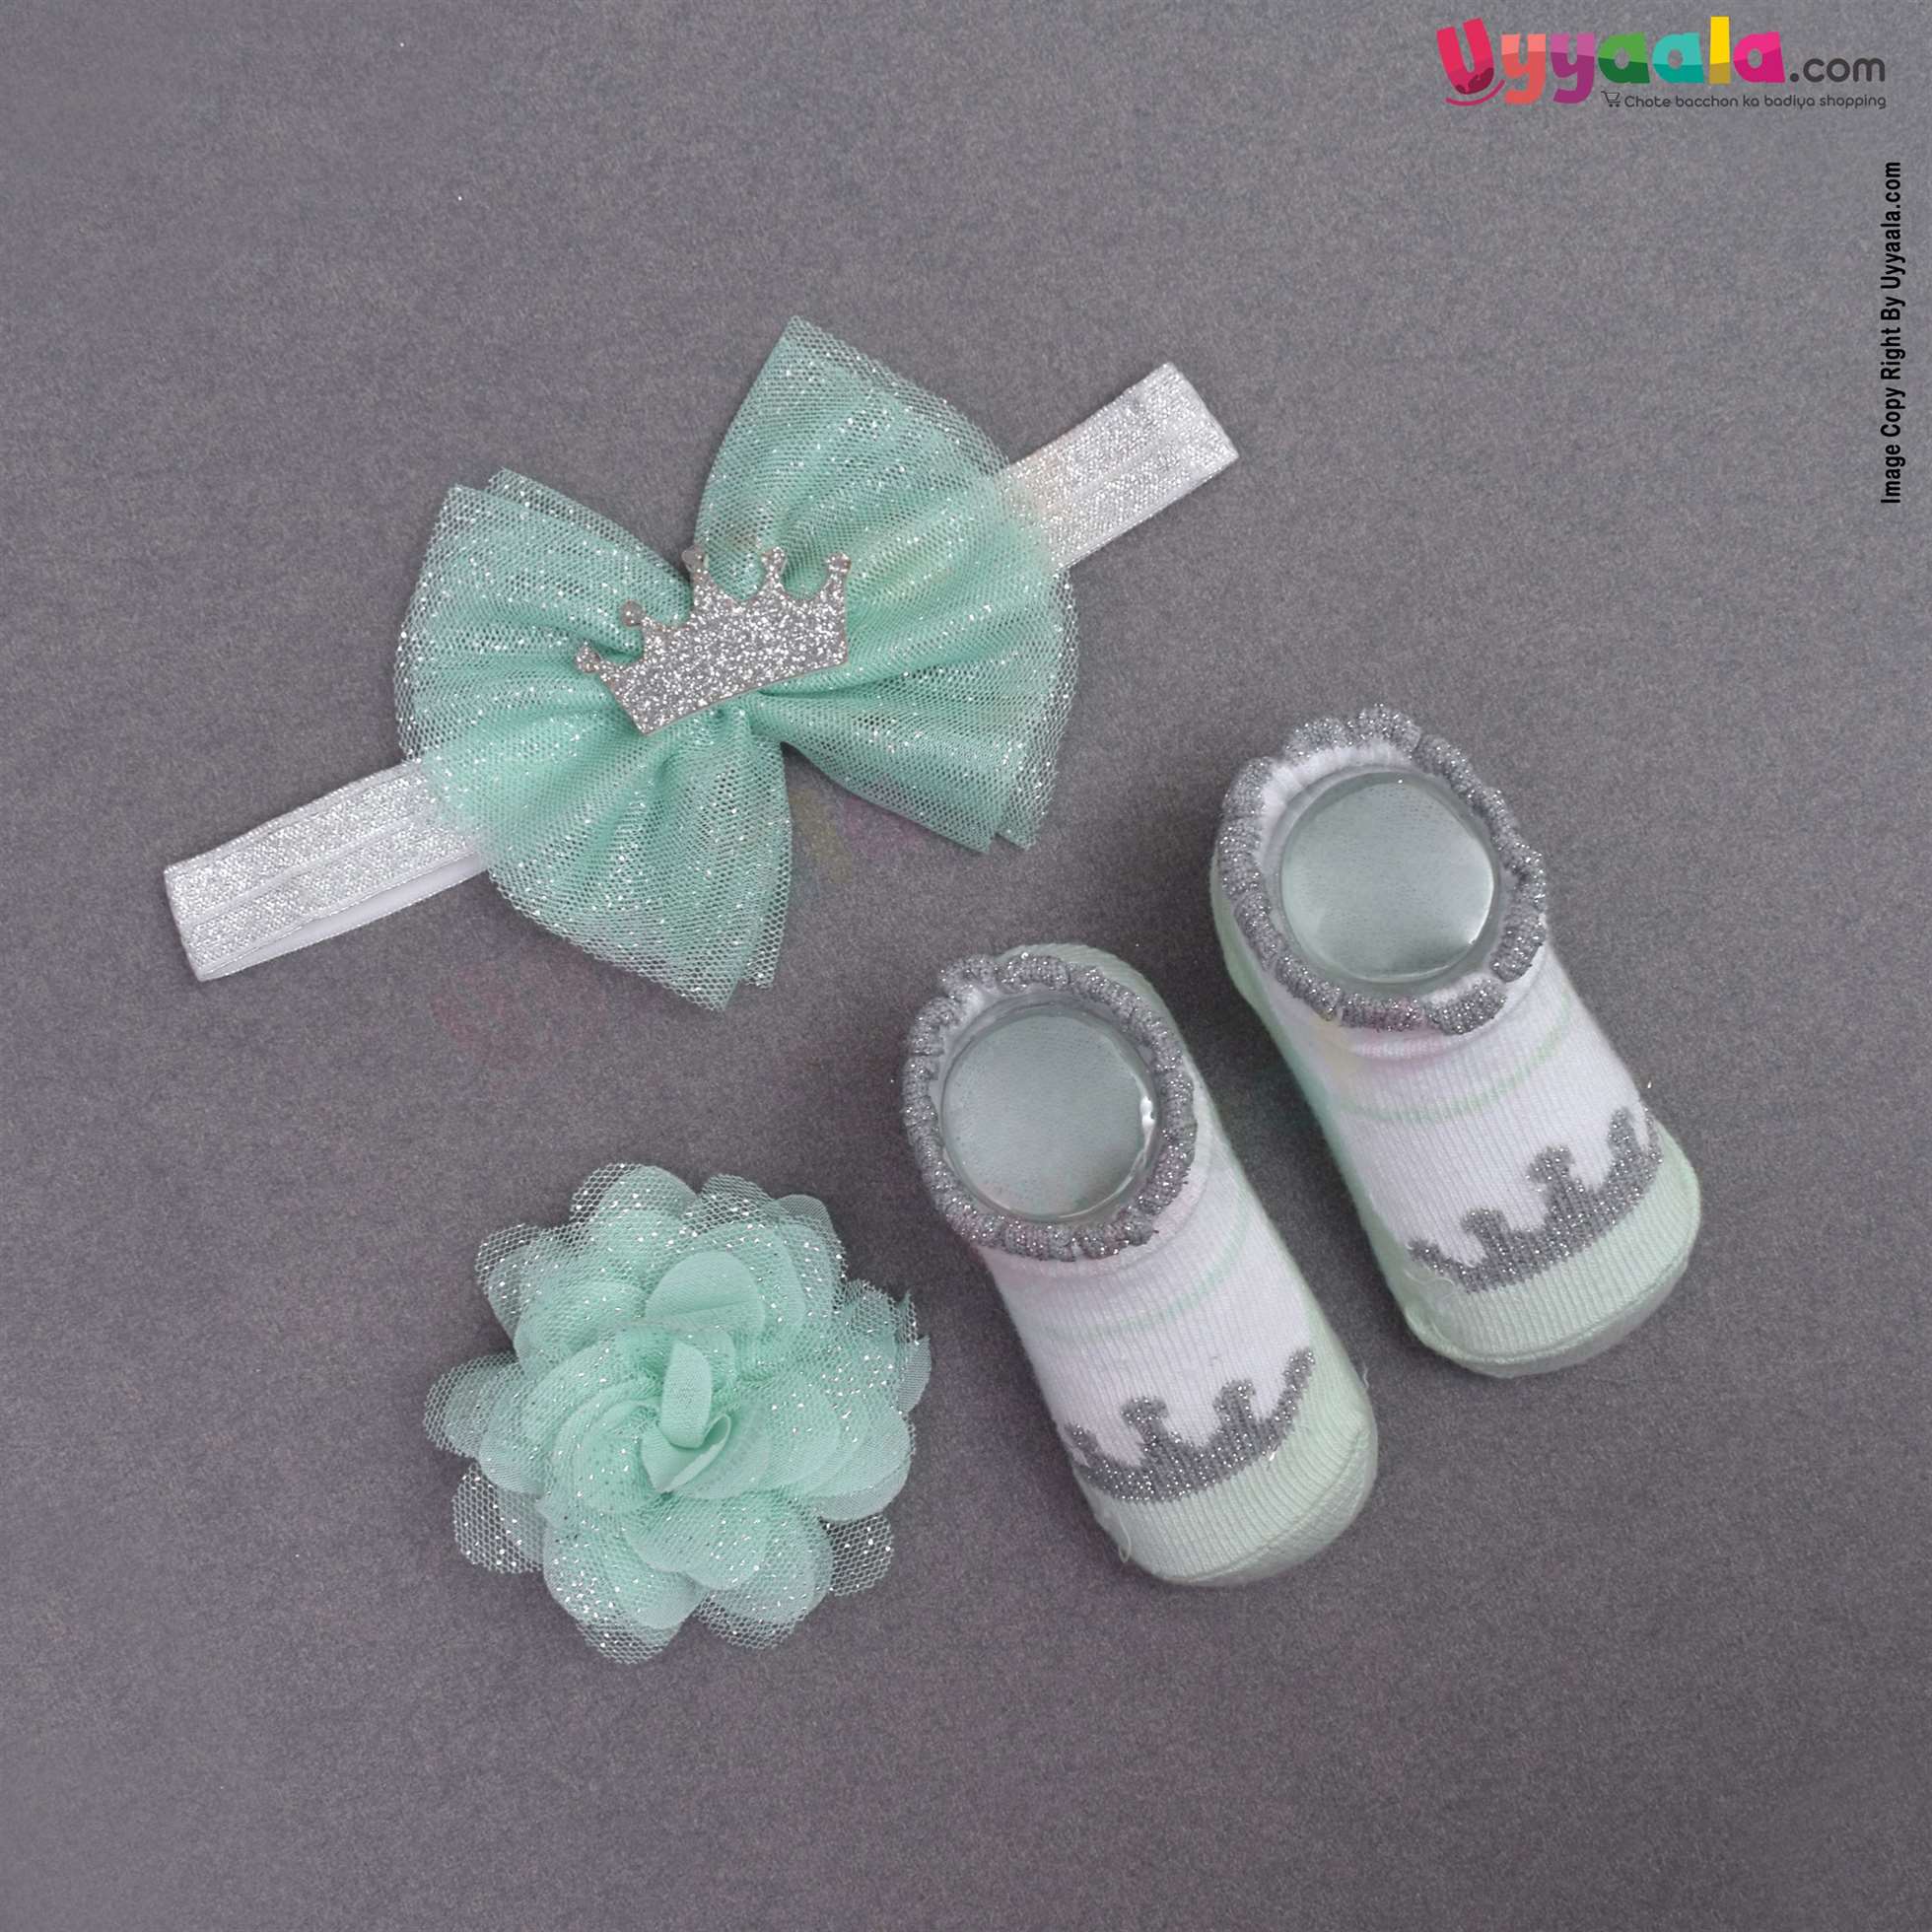 LION BEAR Glittery headwrap, flower bow clip & booties set (3 pcs) for babies - green with ash glittery crown patch, 0 - 12 m